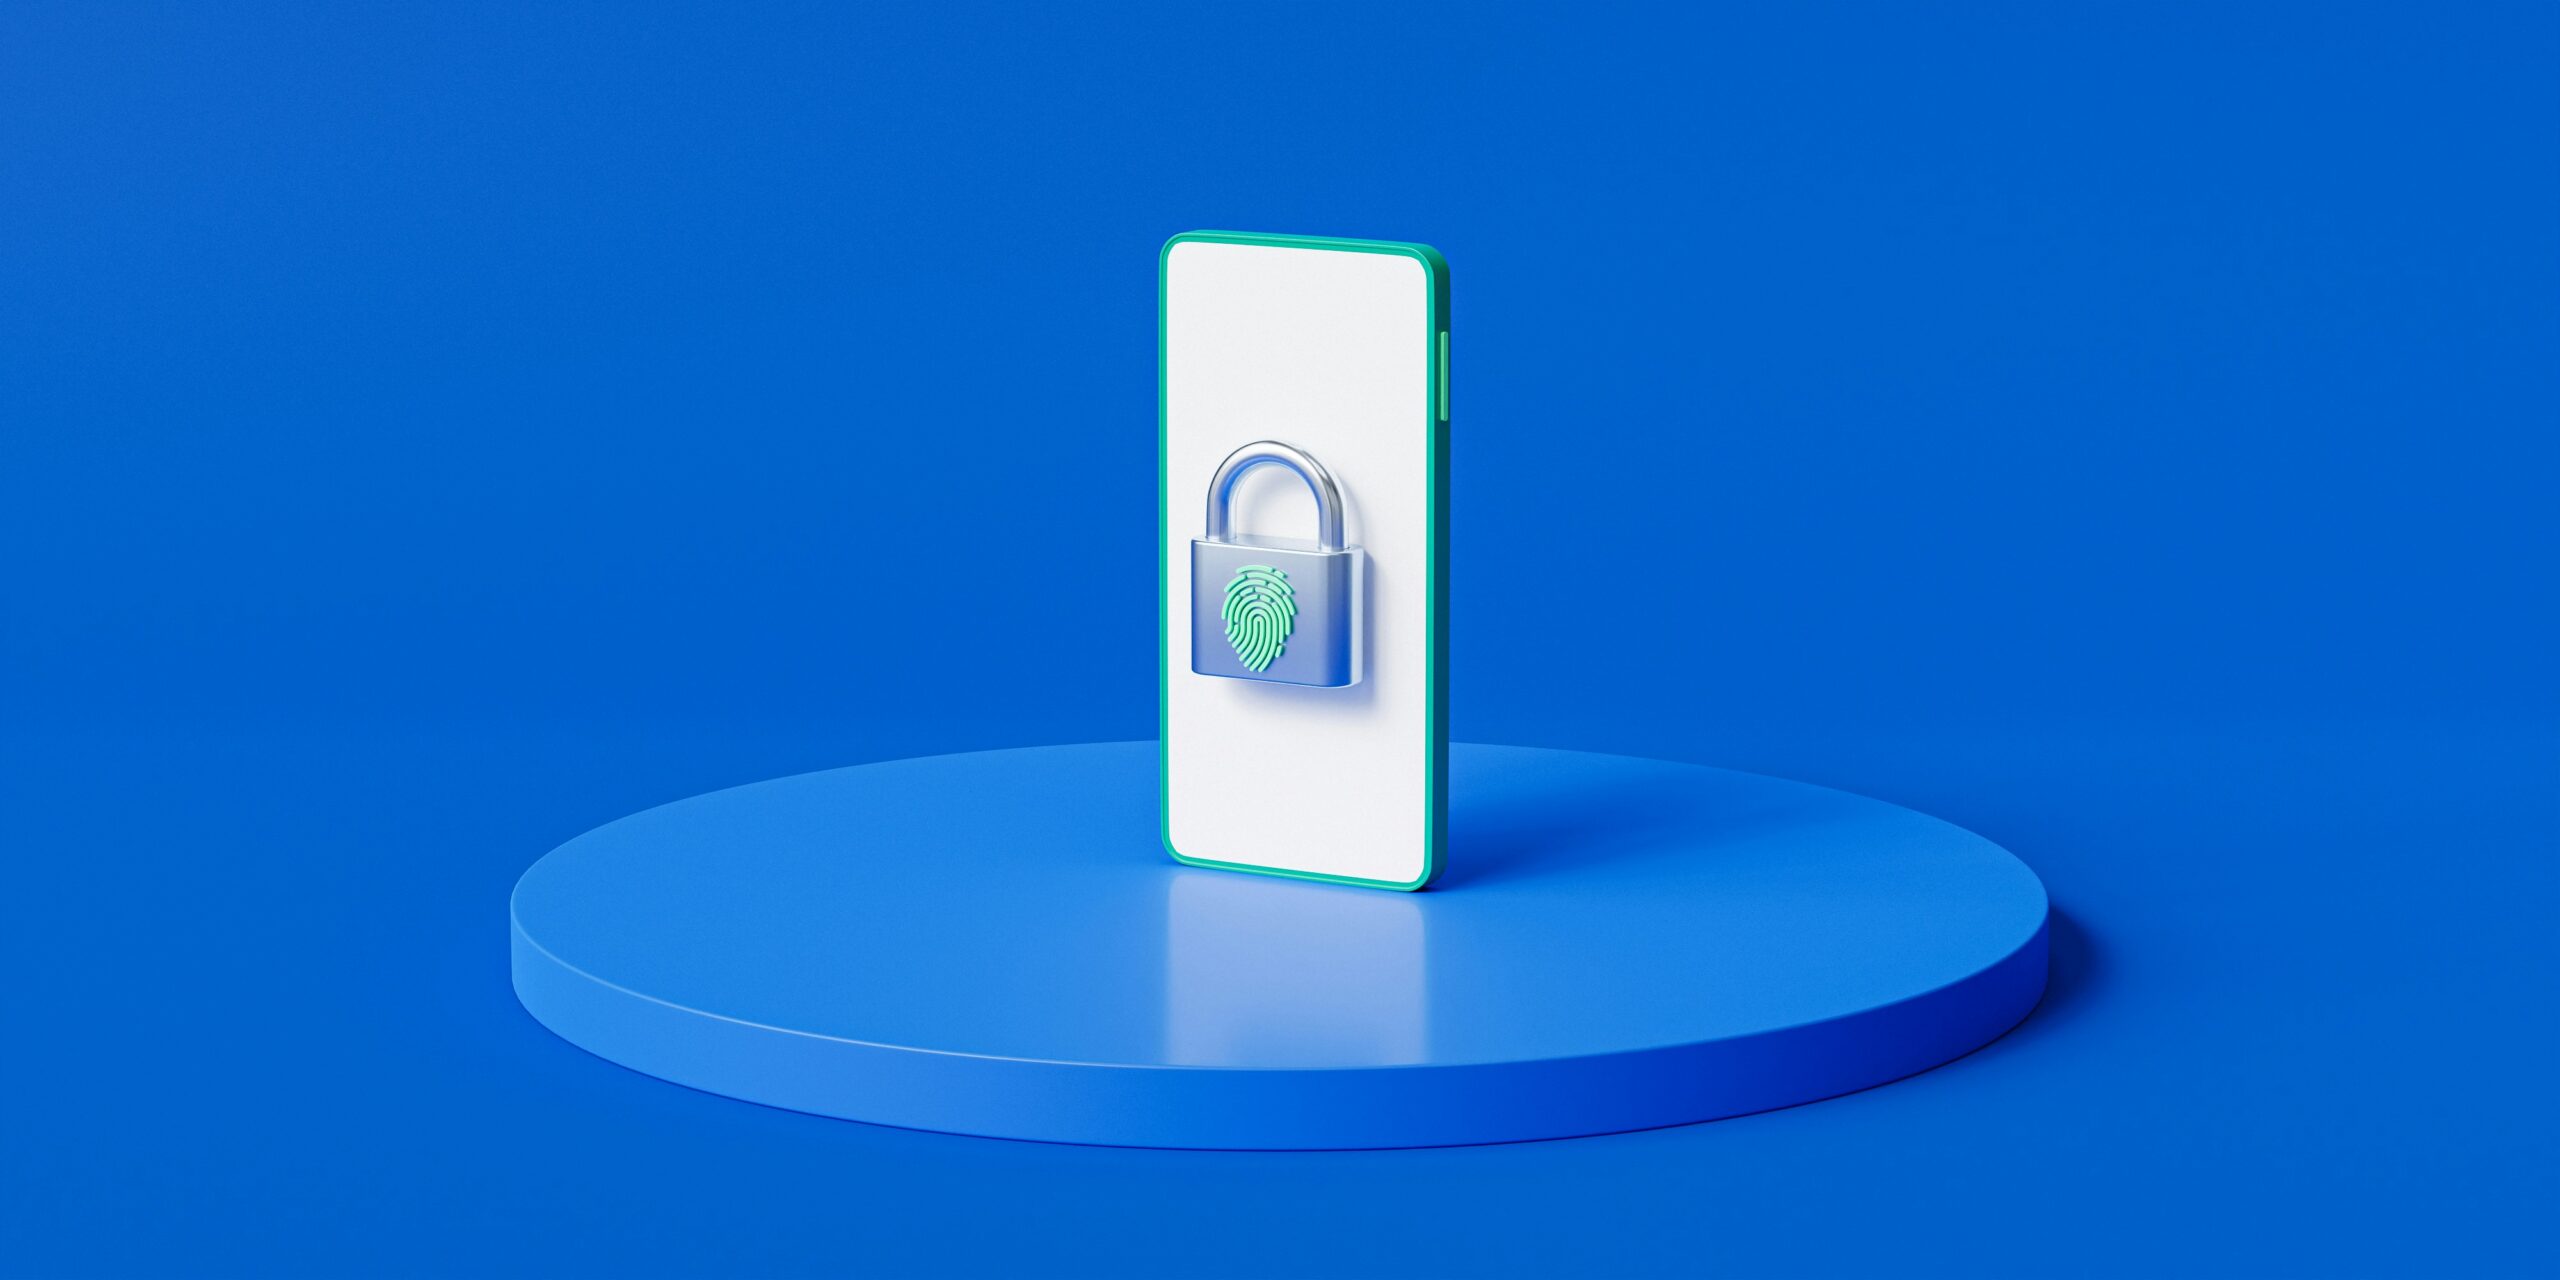 Smartphone with fingerprint security feature on a blue background, symbolizing end user managed IT support services.